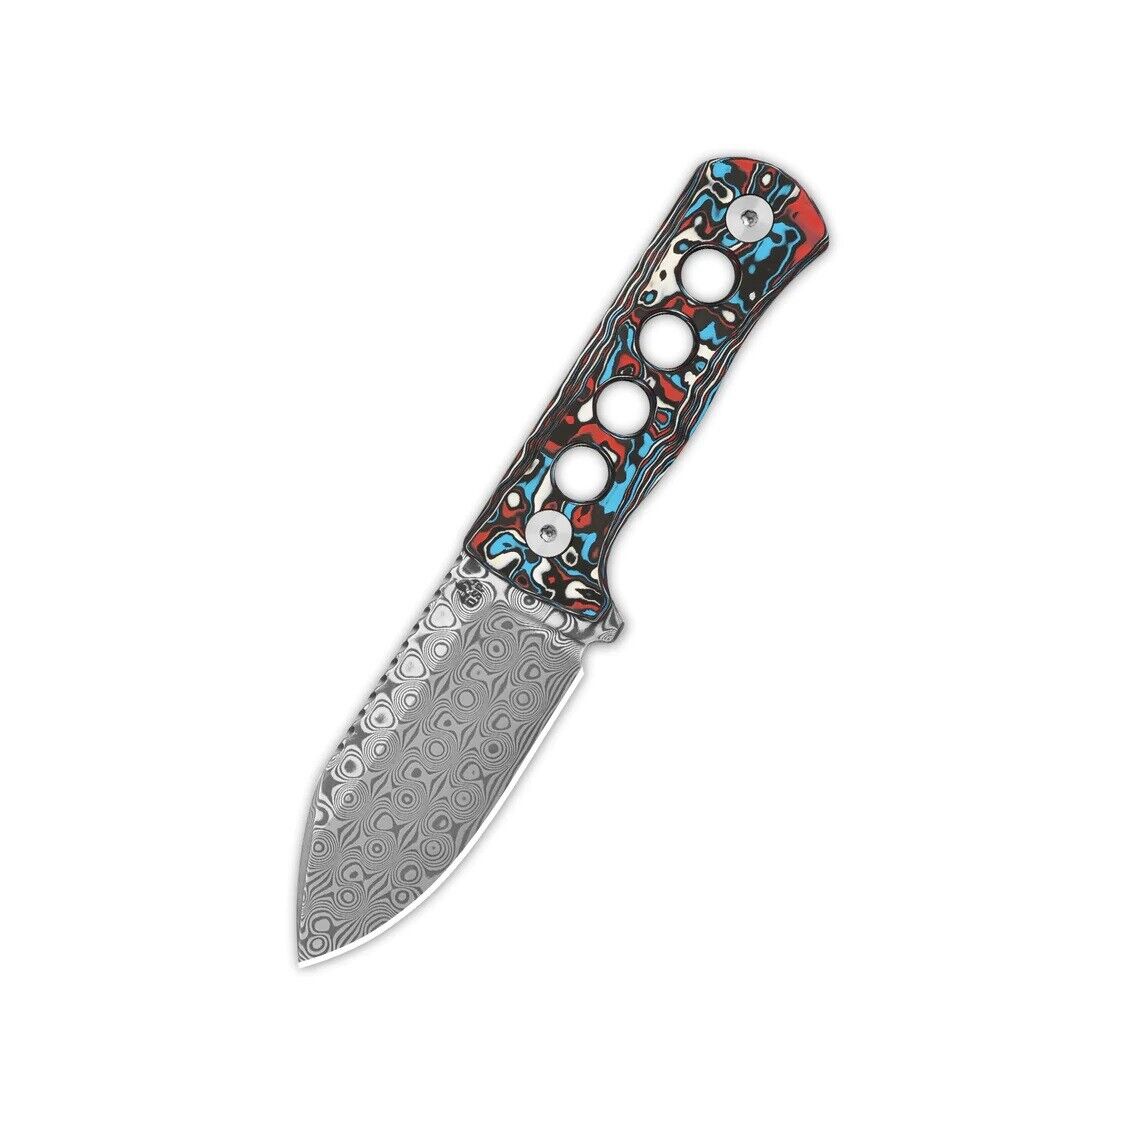 QSP Canary Fixed Blade Knife Black/Blue/Red CF Handle Laminated Damascus QS141-J